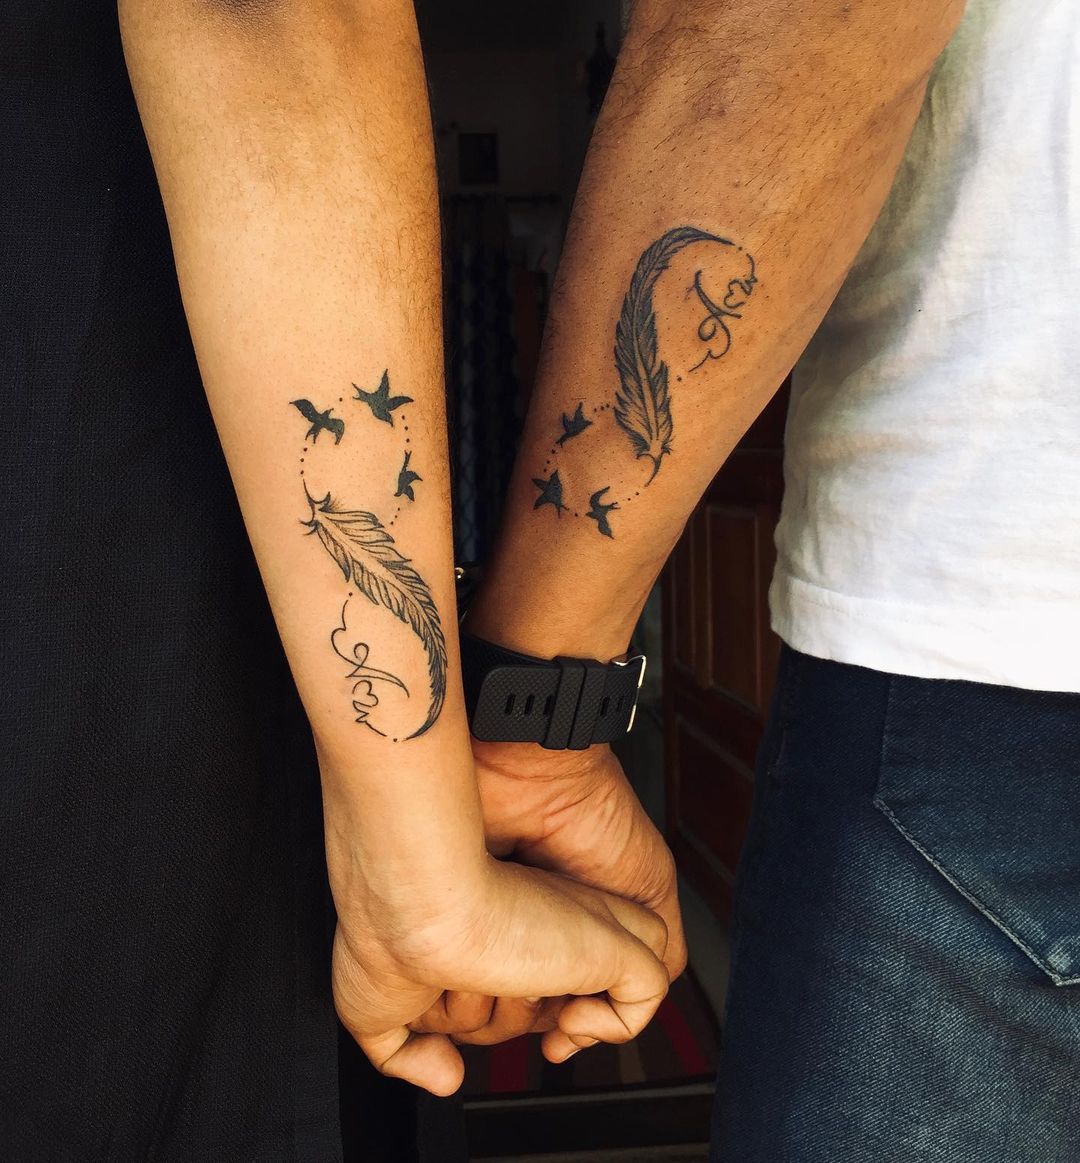 10 Adorable Tattoo Designs Perfect for Couples on Valentines Day